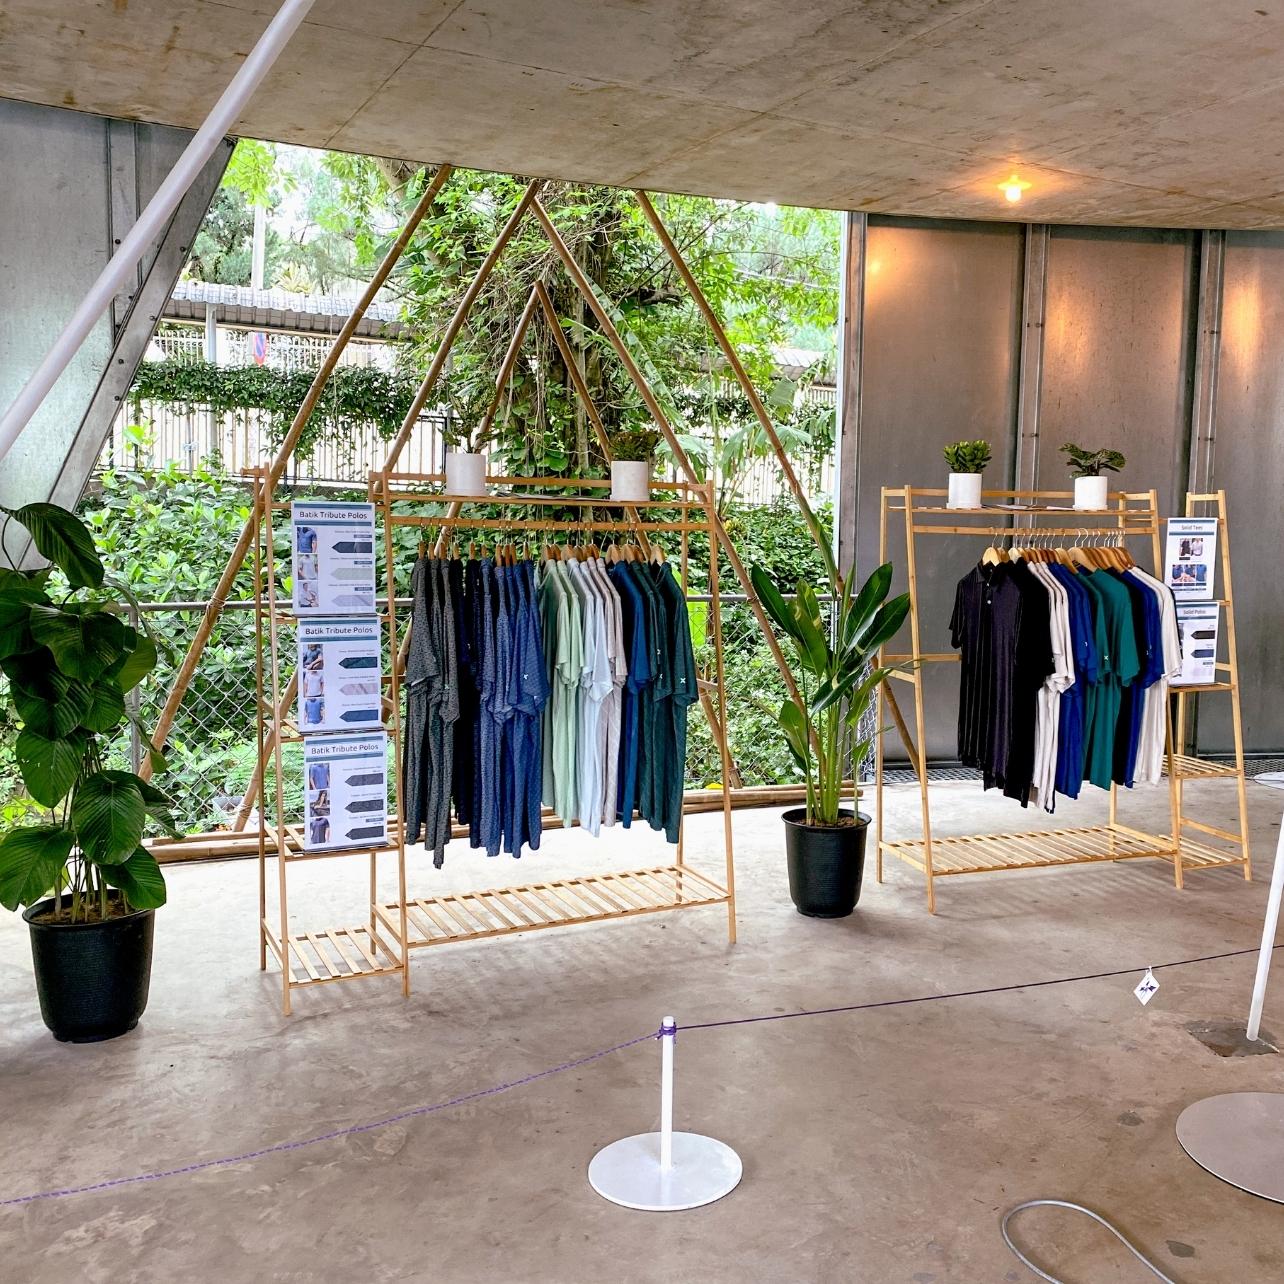 KLWKND - Bamboo House Pop-up